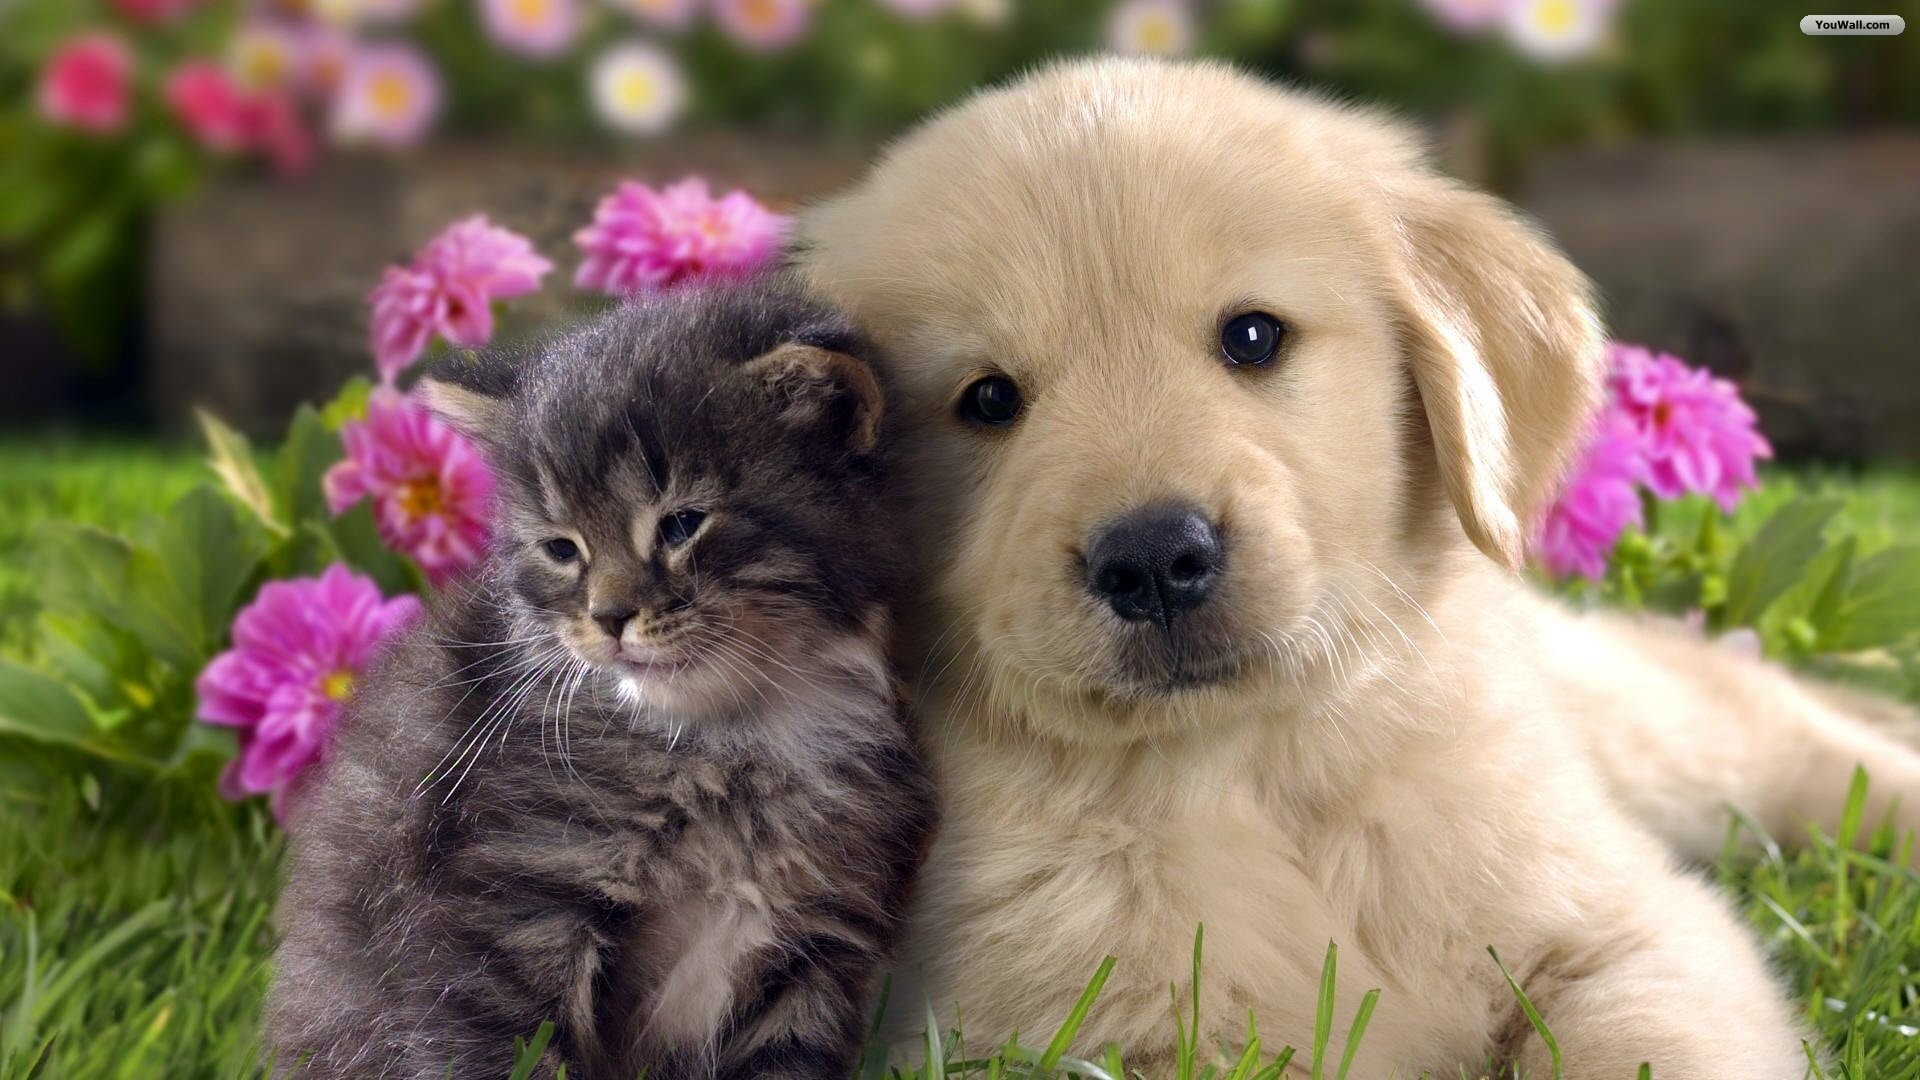 Cat and Dog Wallpaper